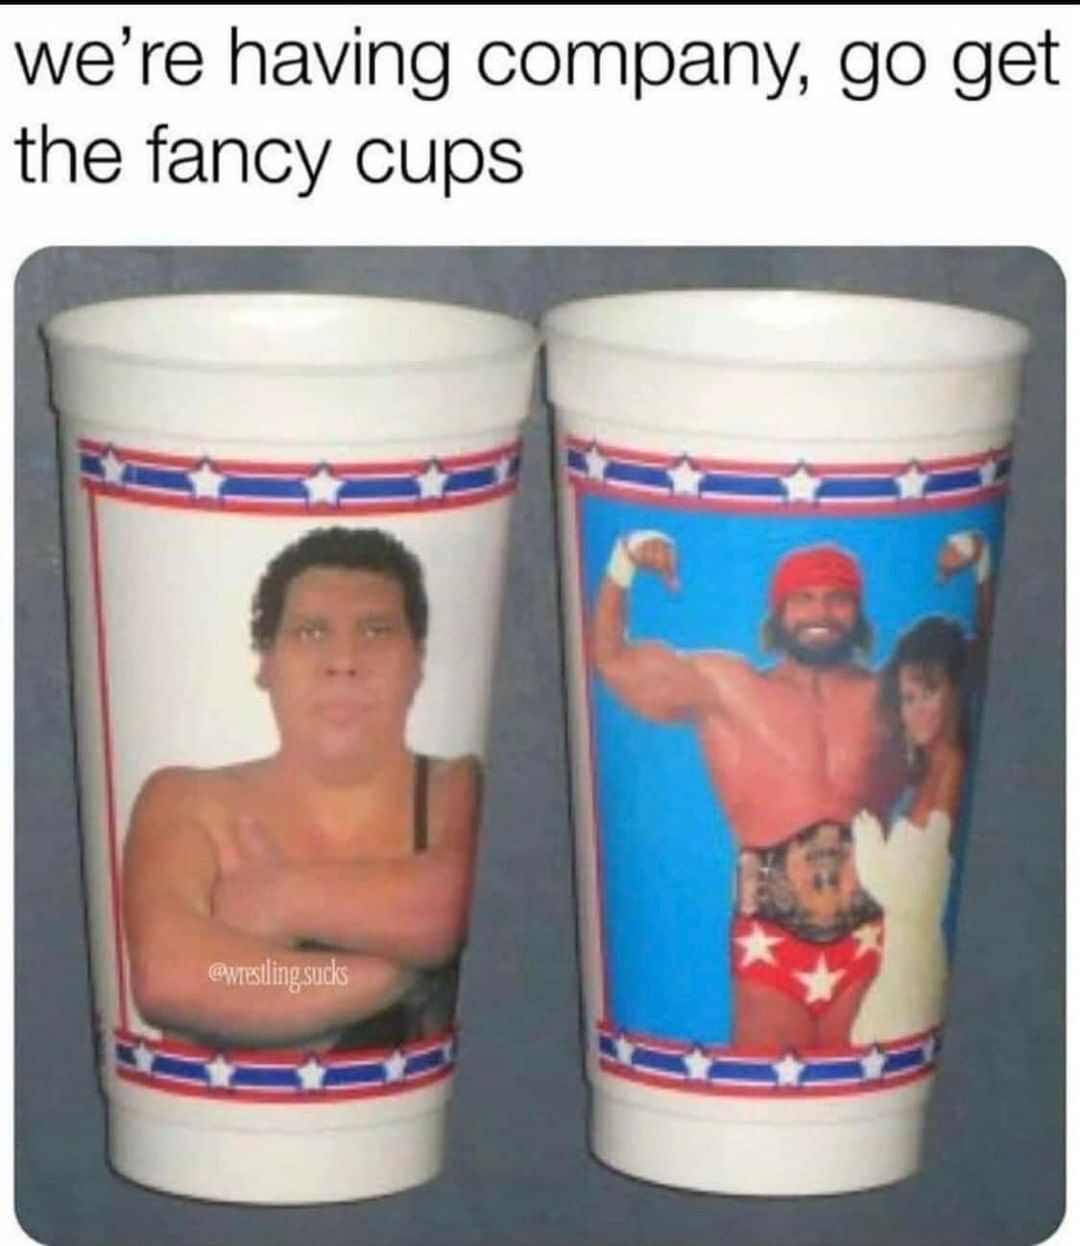 We're having company, go get the fancy cups.